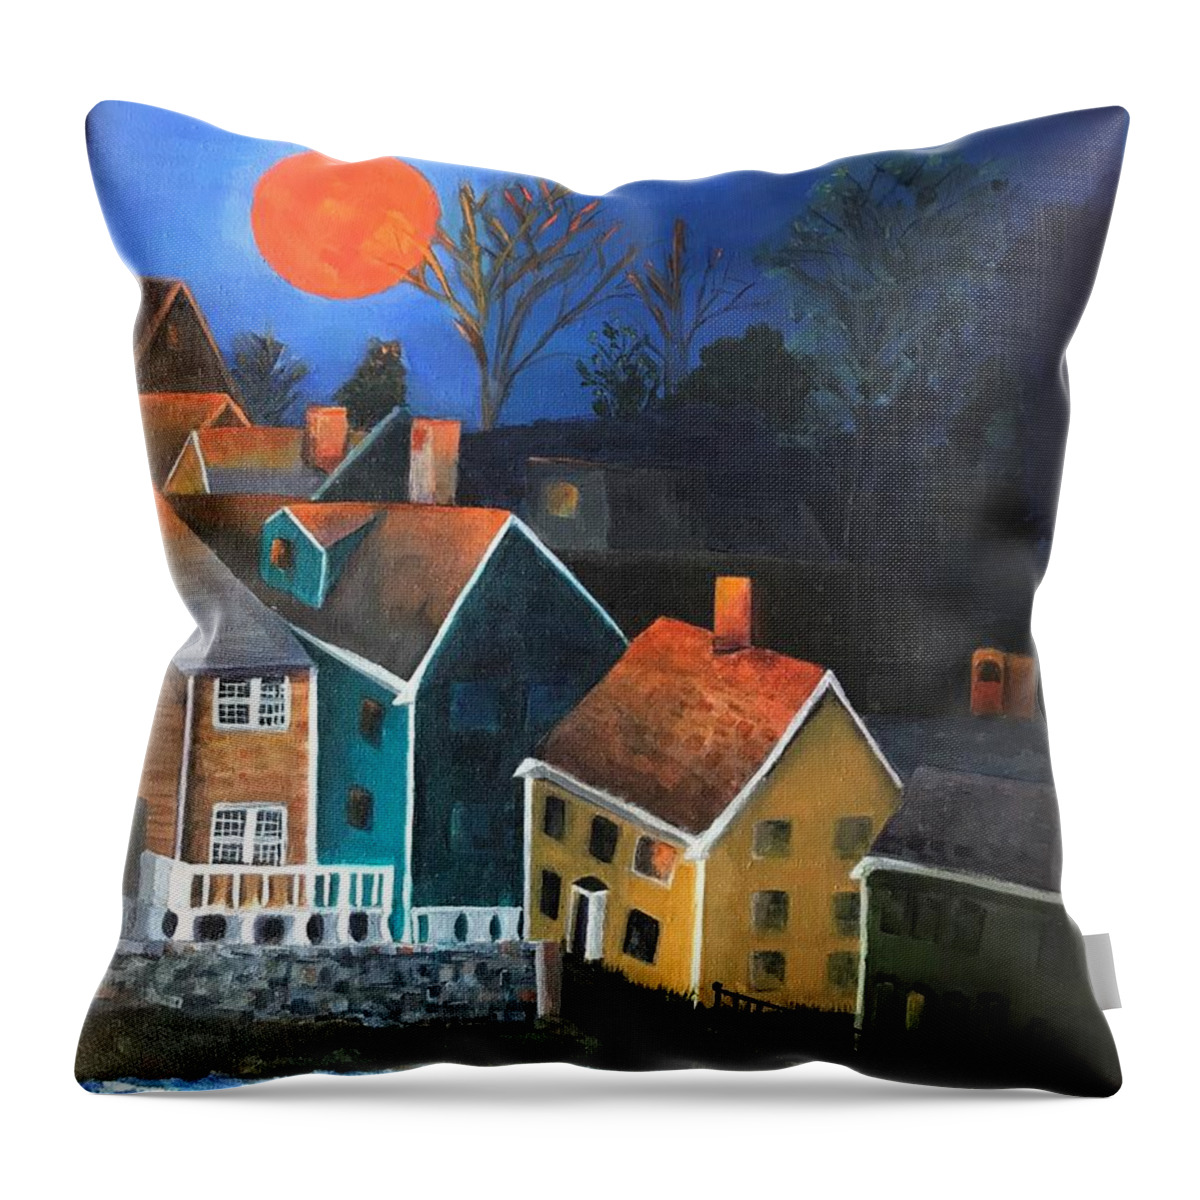 Moon Throw Pillow featuring the painting Village Moon by Deborah Naves